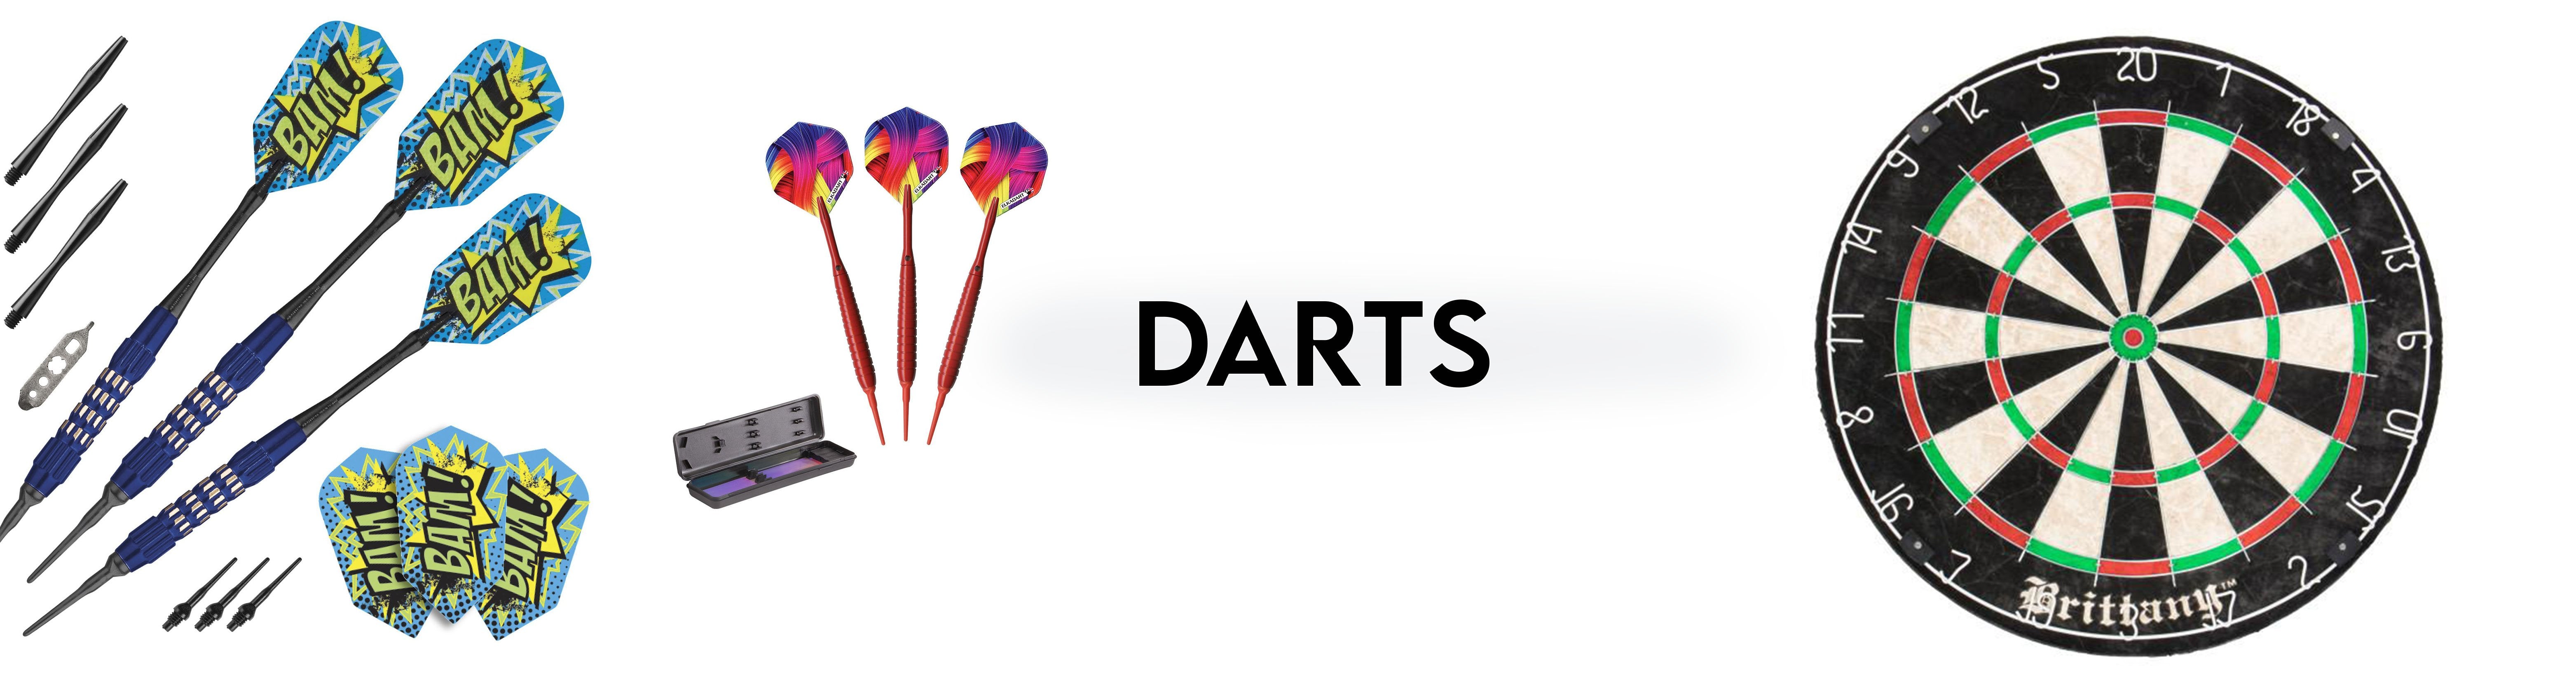 Darts - Recreation Outfitters